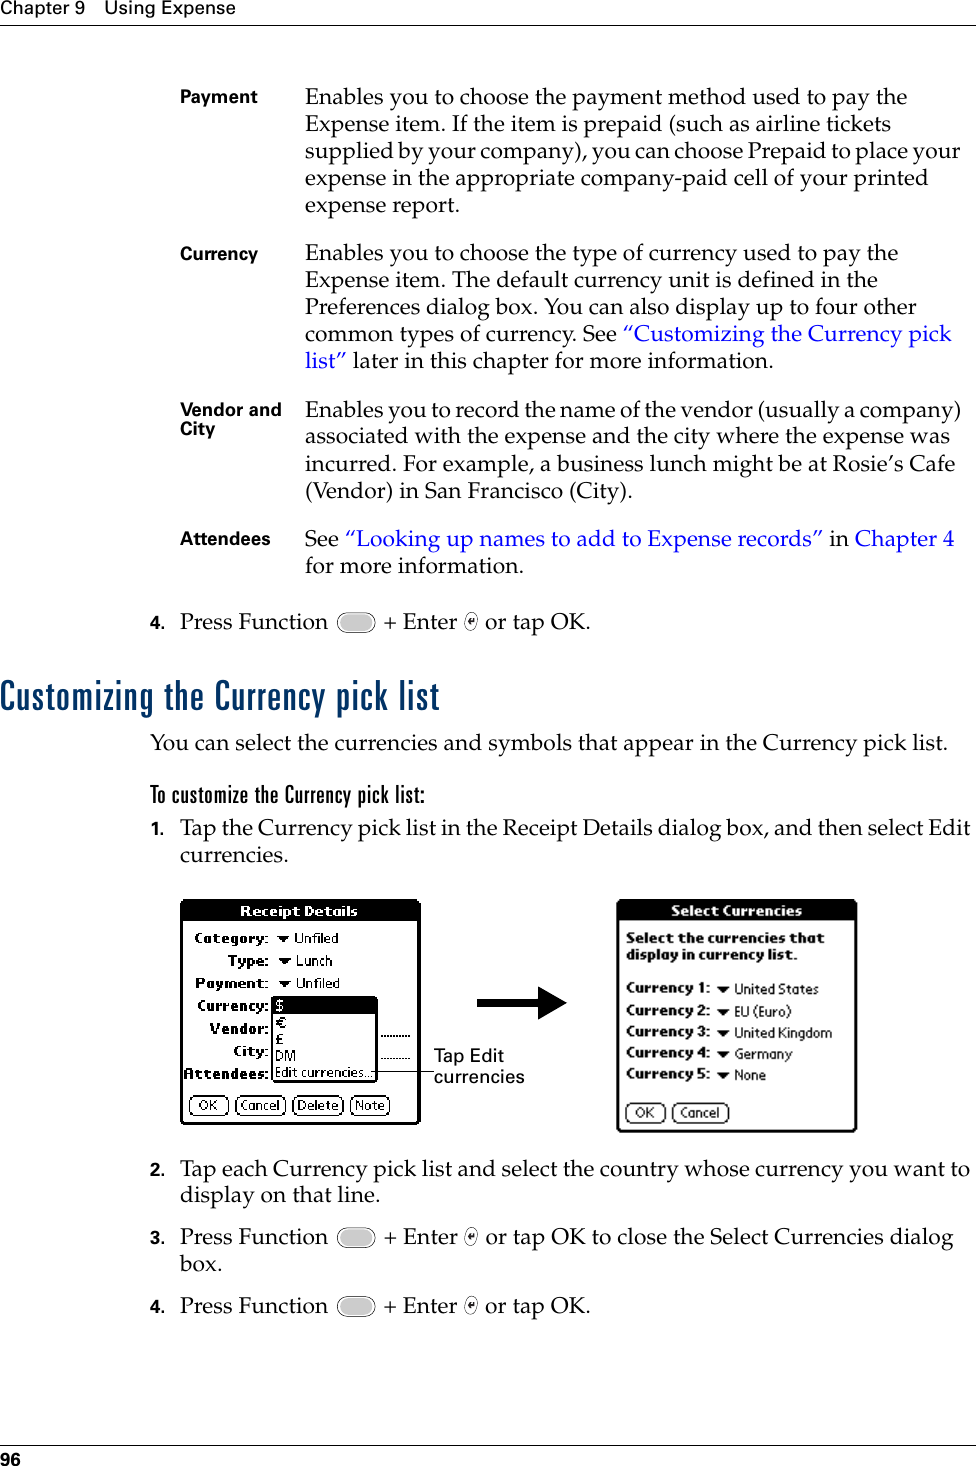 Chapter 9 Using Expense964. Press Function   + Enter   or tap OK.Customizing the Currency pick listYou can select the currencies and symbols that appear in the Currency pick list.To customize the Currency pick list:1. Tap the Currency pick list in the Receipt Details dialog box, and then select Edit currencies.2. Tap each Currency pick list and select the country whose currency you want to display on that line.3. Press Function   + Enter   or tap OK to close the Select Currencies dialog box.4. Press Function   + Enter   or tap OK.Payment Enables you to choose the payment method used to pay the Expense item. If the item is prepaid (such as airline tickets supplied by your company), you can choose Prepaid to place your expense in the appropriate company-paid cell of your printed expense report.Currency Enables you to choose the type of currency used to pay the Expense item. The default currency unit is defined in the Preferences dialog box. You can also display up to four other common types of currency. See “Customizing the Currency pick list” later in this chapter for more information.Vendor and City Enables you to record the name of the vendor (usually a company) associated with the expense and the city where the expense was incurred. For example, a business lunch might be at Rosie’s Cafe (Vendor) in San Francisco (City).Attendees See “Looking up names to add to Expense records” in Chapter 4 for more information.Tap Edit currenciesPalm, Inc. Confidential